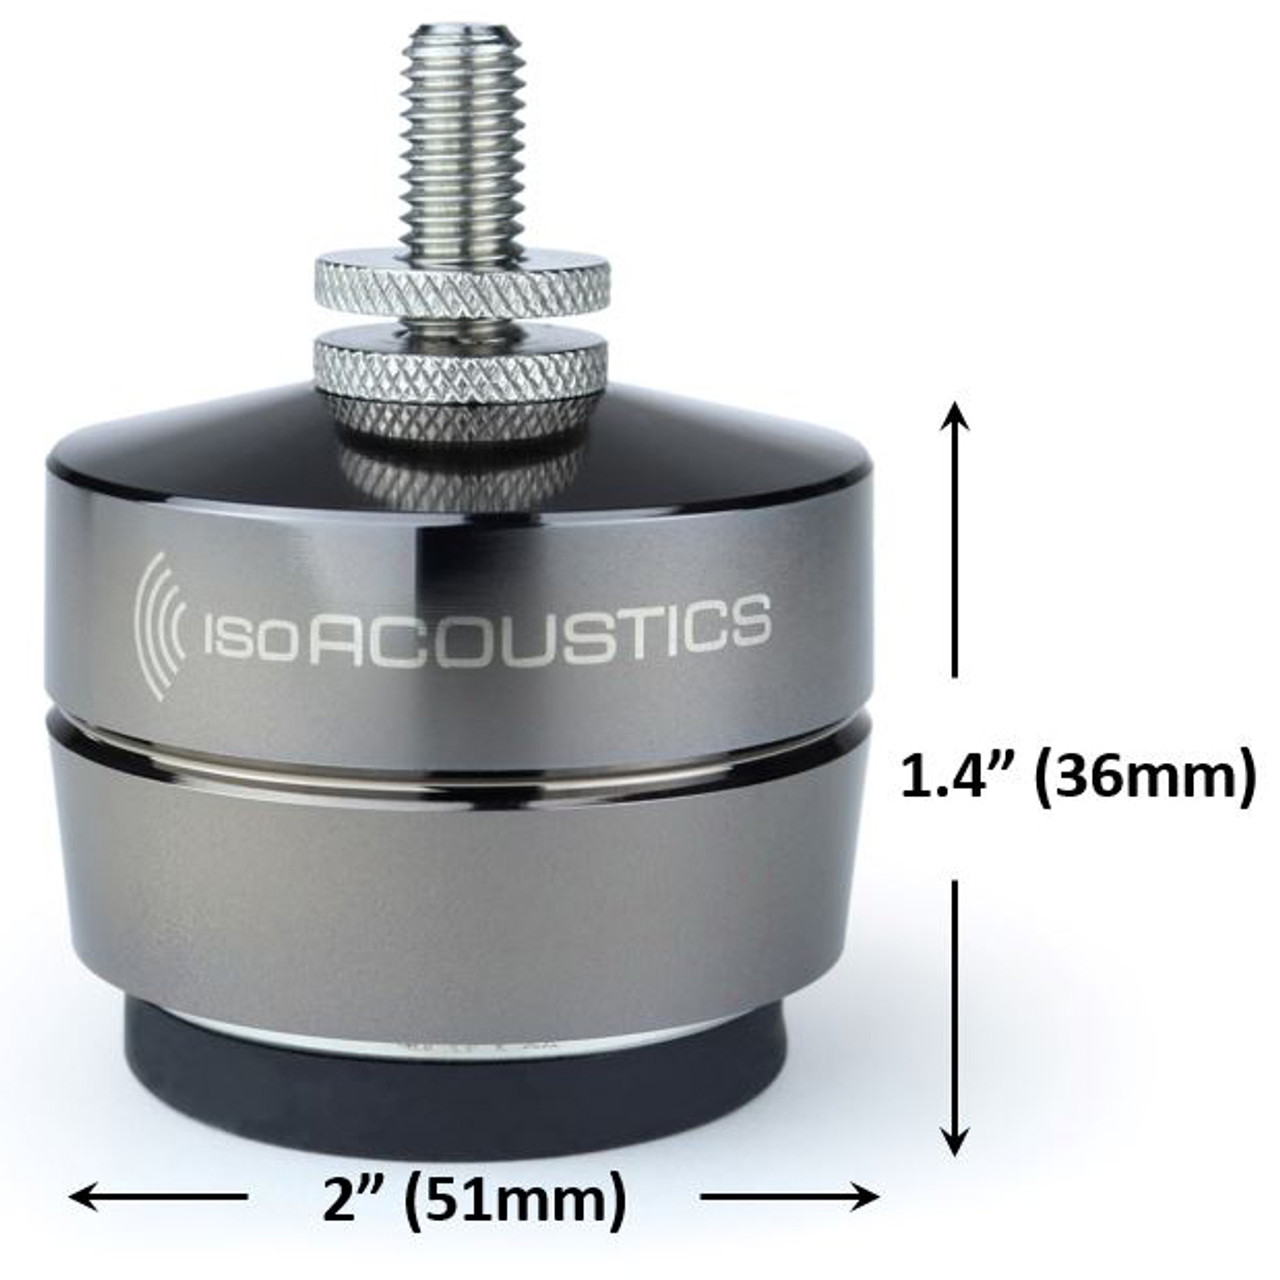 IsoAcoustics GAIA 2 footers